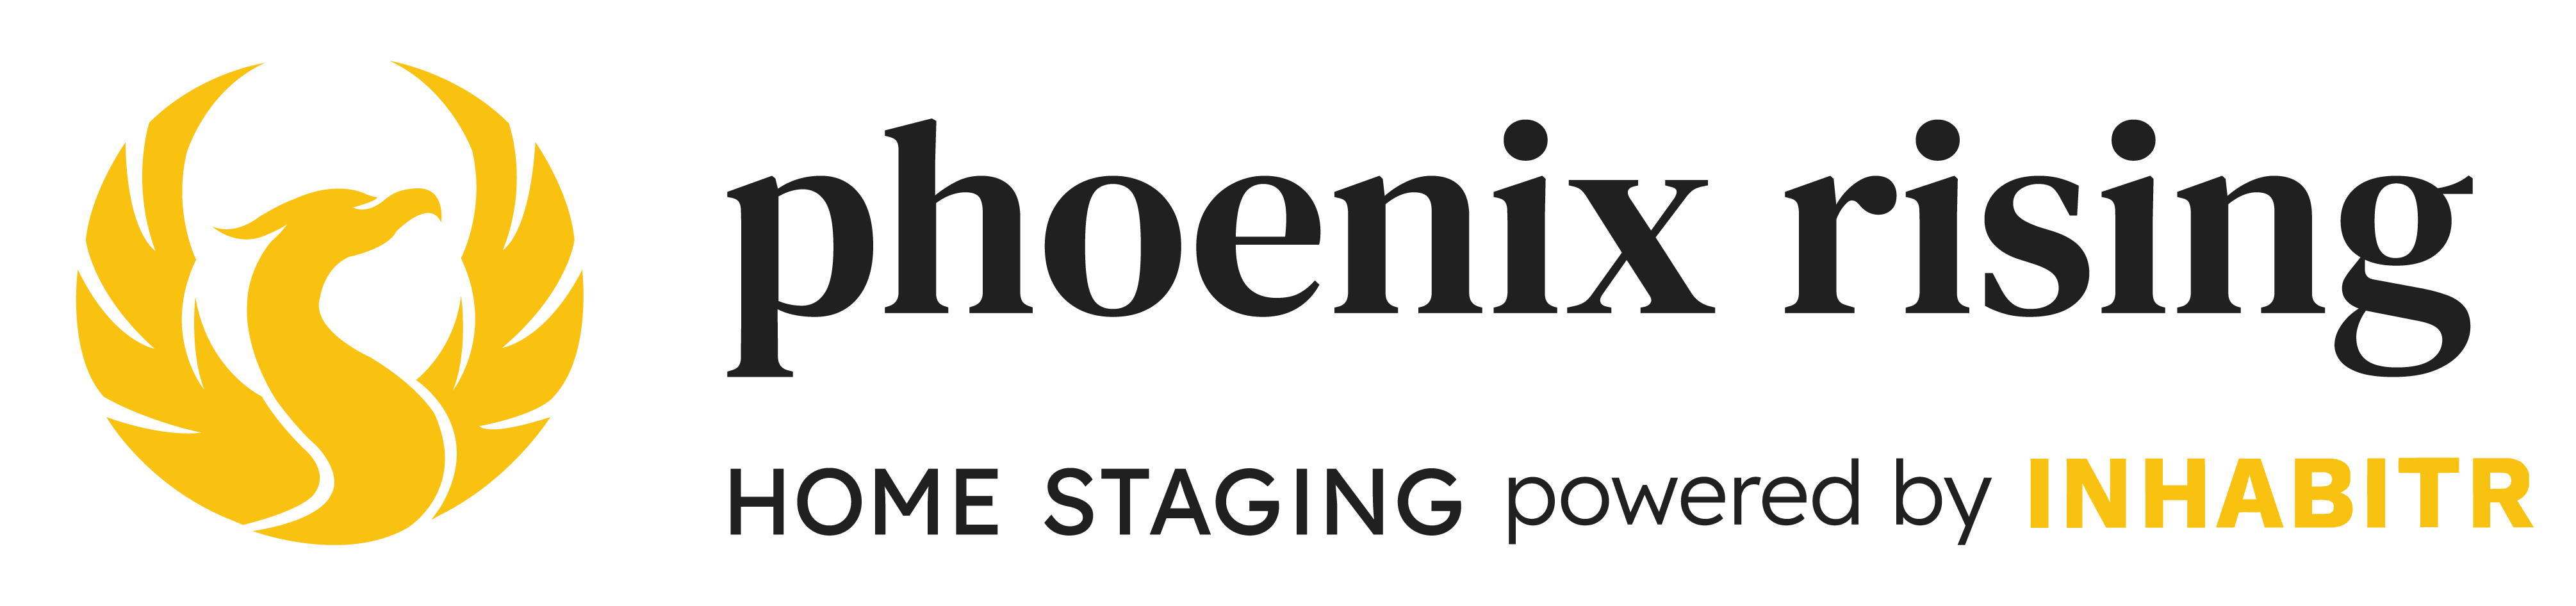 Phoenix Rising Home Staging and Interior Design Logo